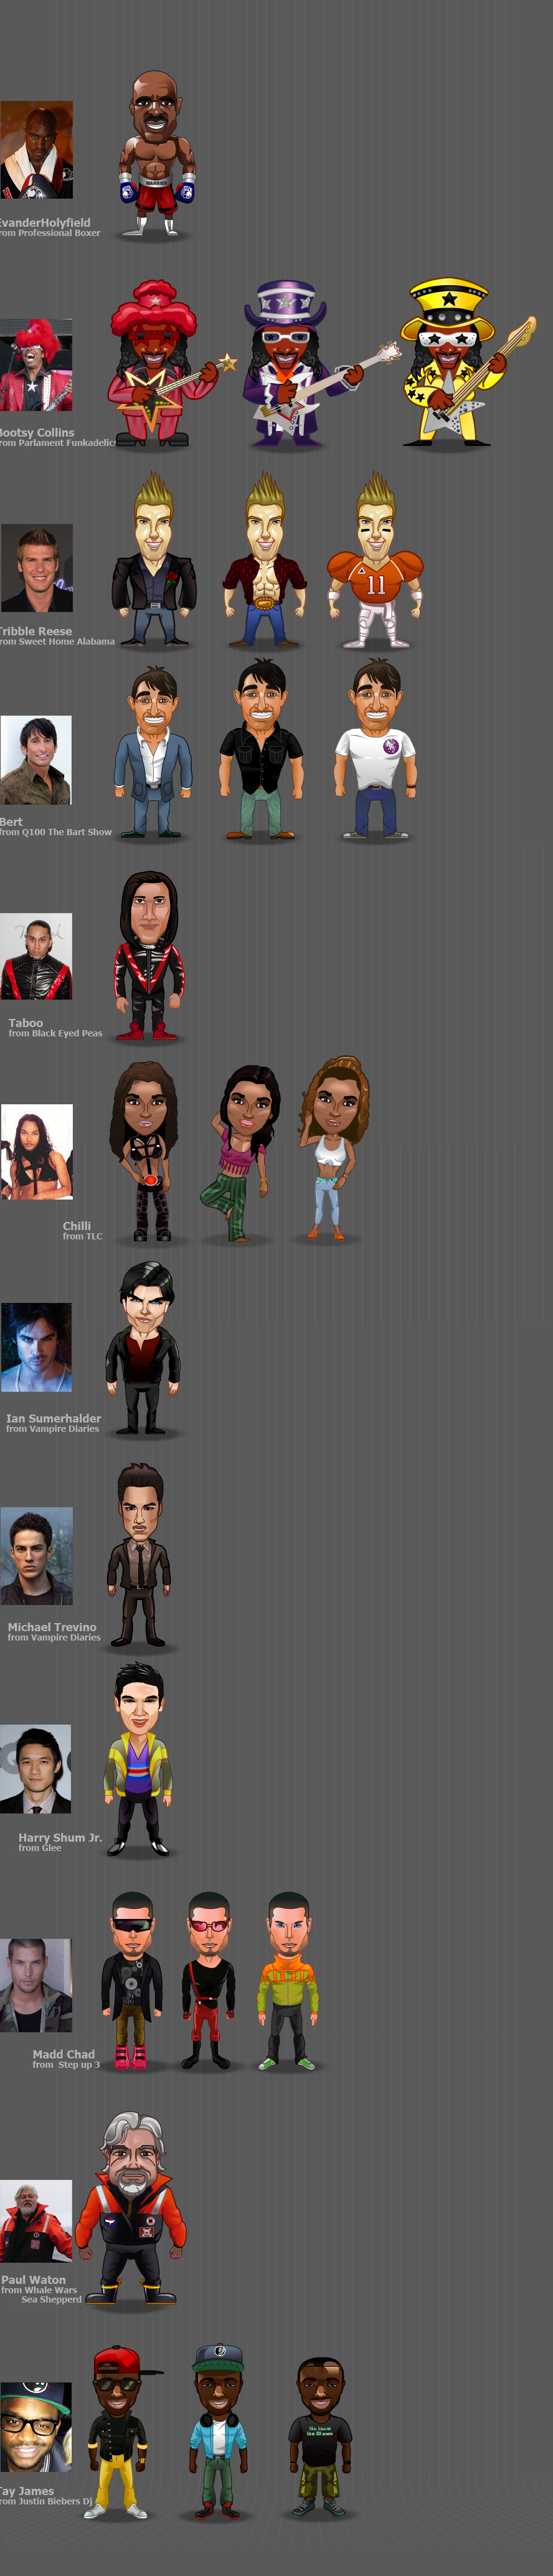 face the fans william William Moritz will moritz characters game  design avatars icons 3D Maya rendering lighting celeb